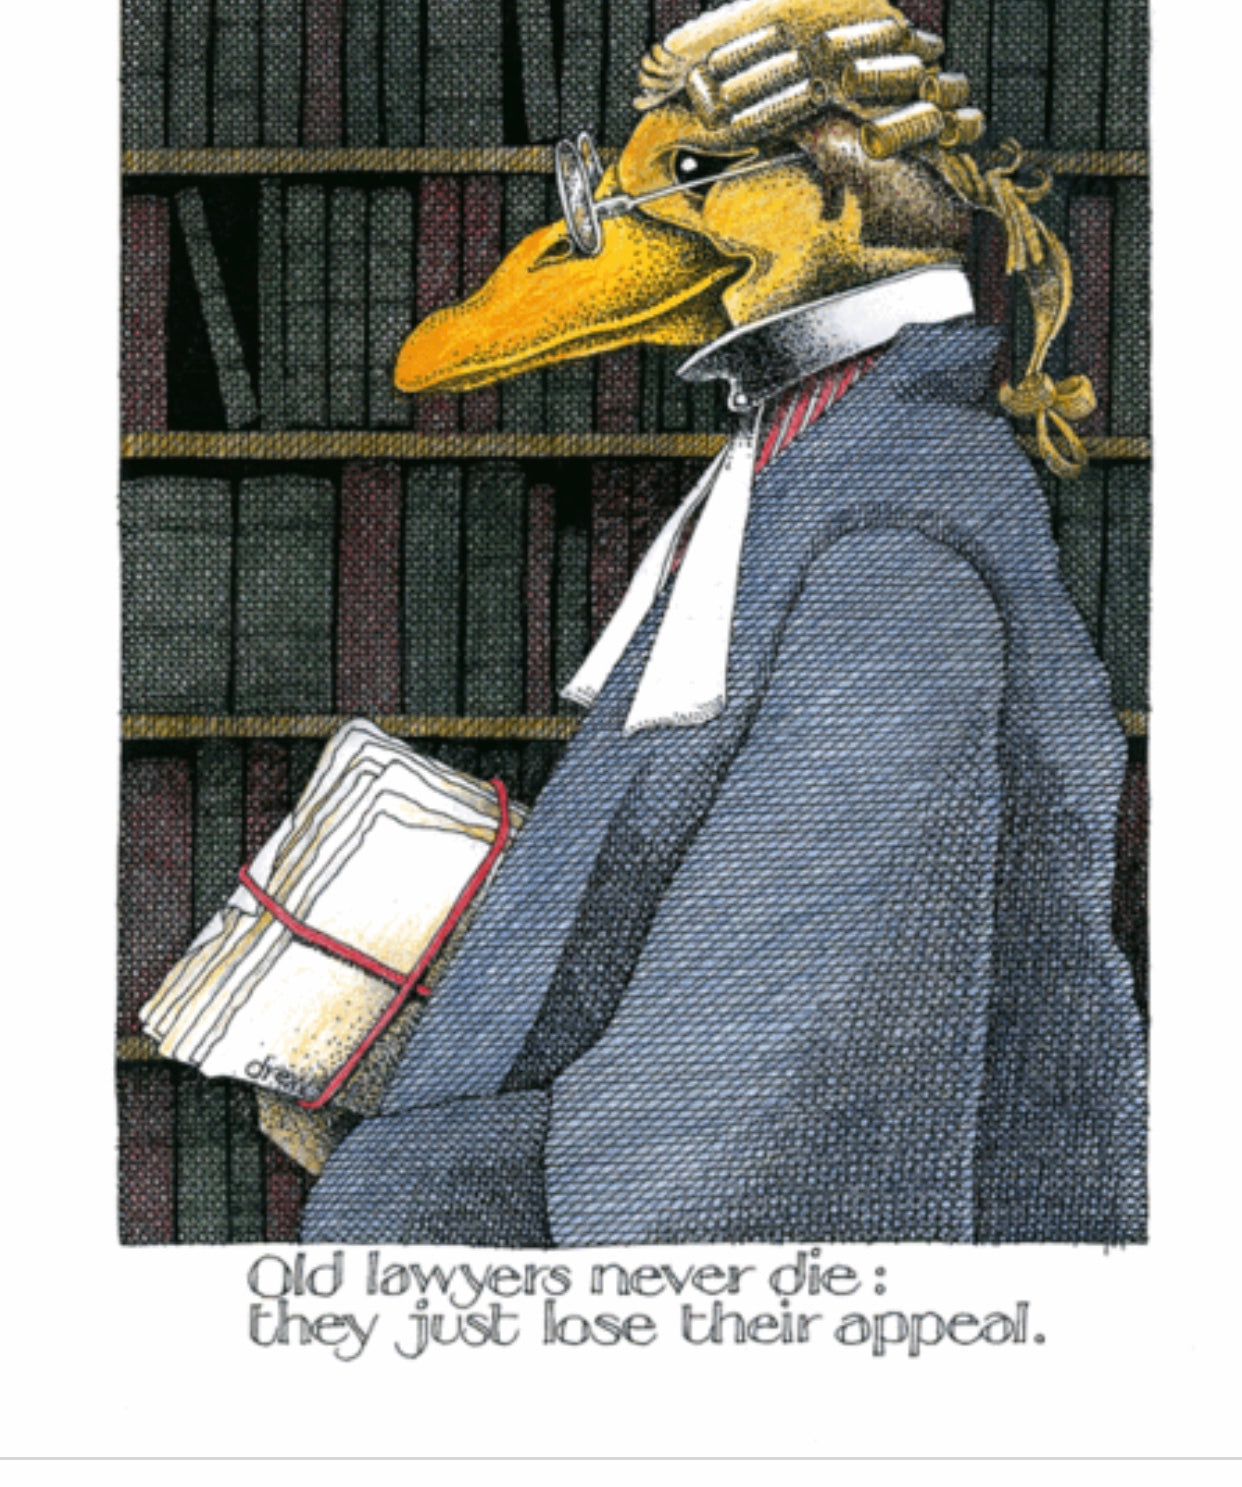 Old lawyers never die greeting cards